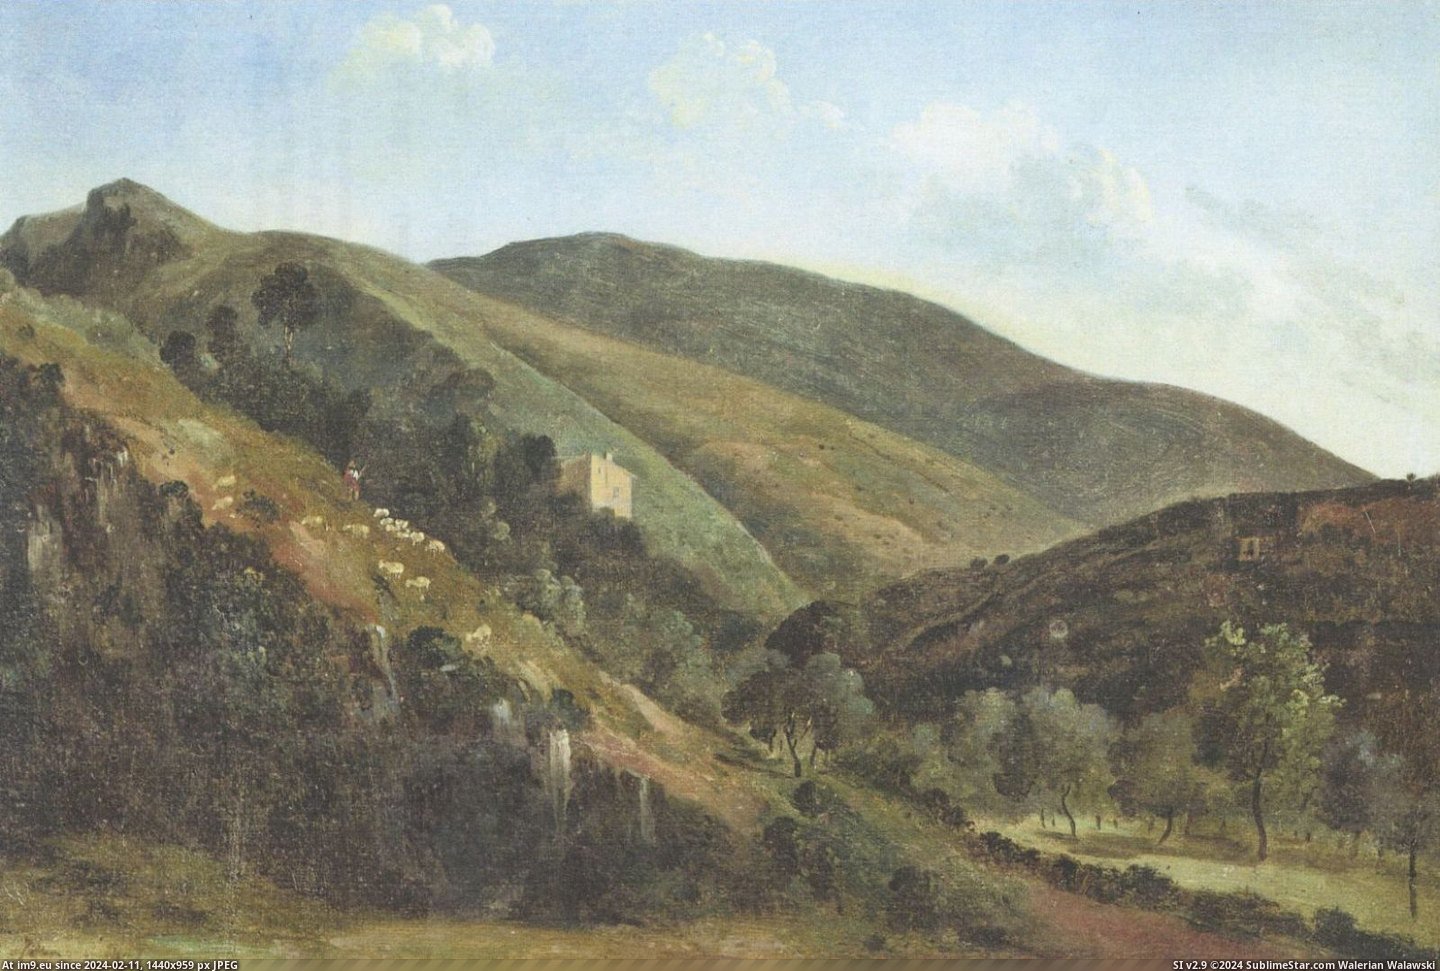 Léon Fleury - Hilly Landscape with Sheep (1827-29) (in Metropolitan Museum Of Art - European Paintings)